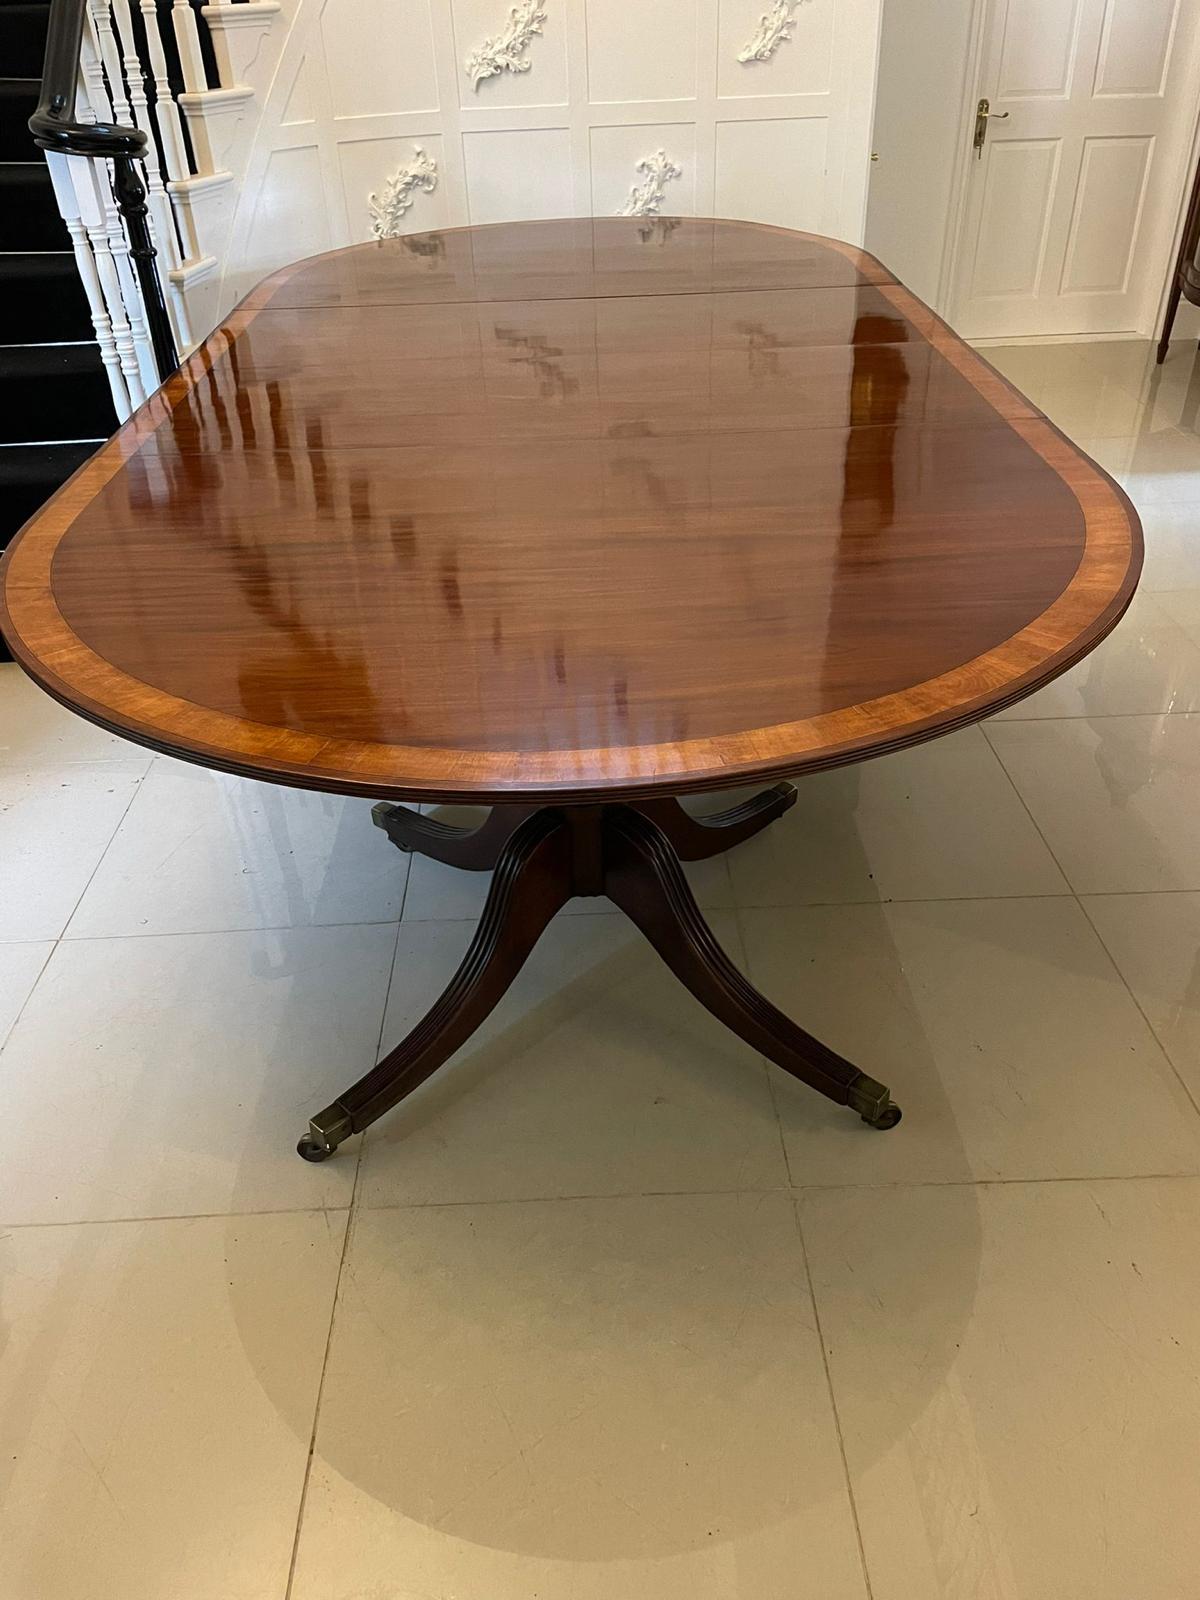 Antique 14 seater George III outstanding quality figured mahogany 3 pilar dining table having an outstanding quality figured mahogany top crossbanded in satinwood and a reeded edge supported by elegant turned pedestal columns standing on four